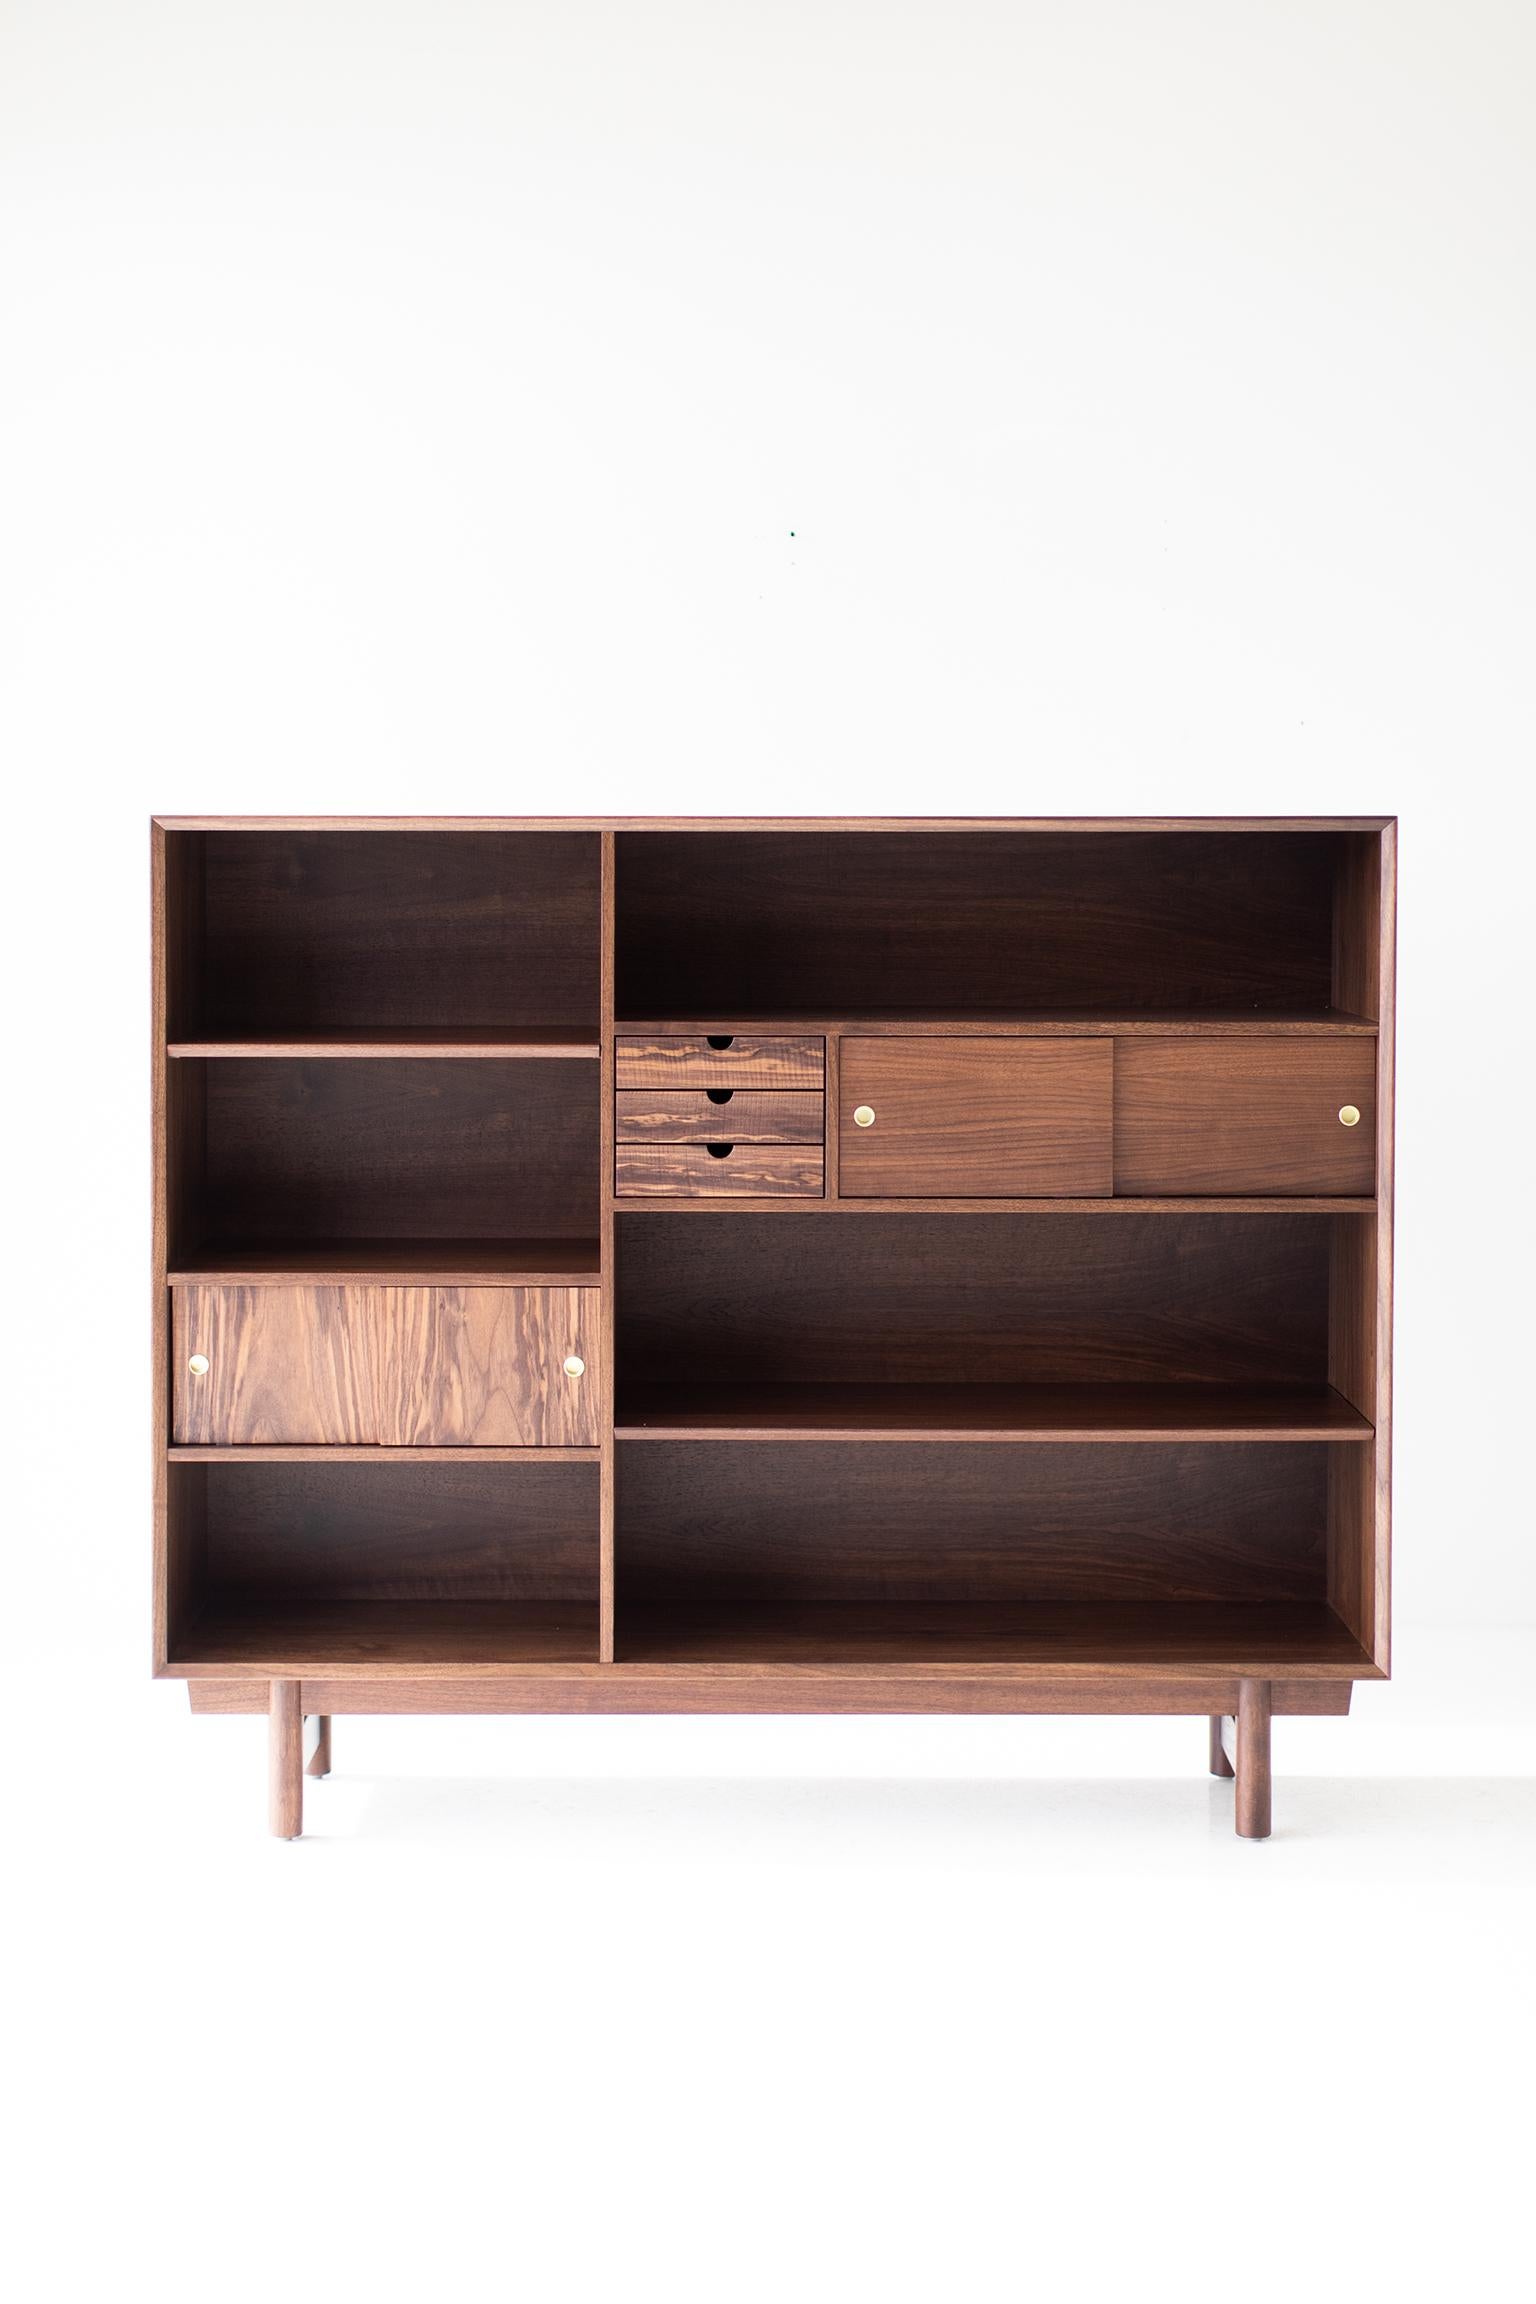 Modern Walnut Bookcase by Lawrence Peabody In New Condition For Sale In Oak Harbor, OH